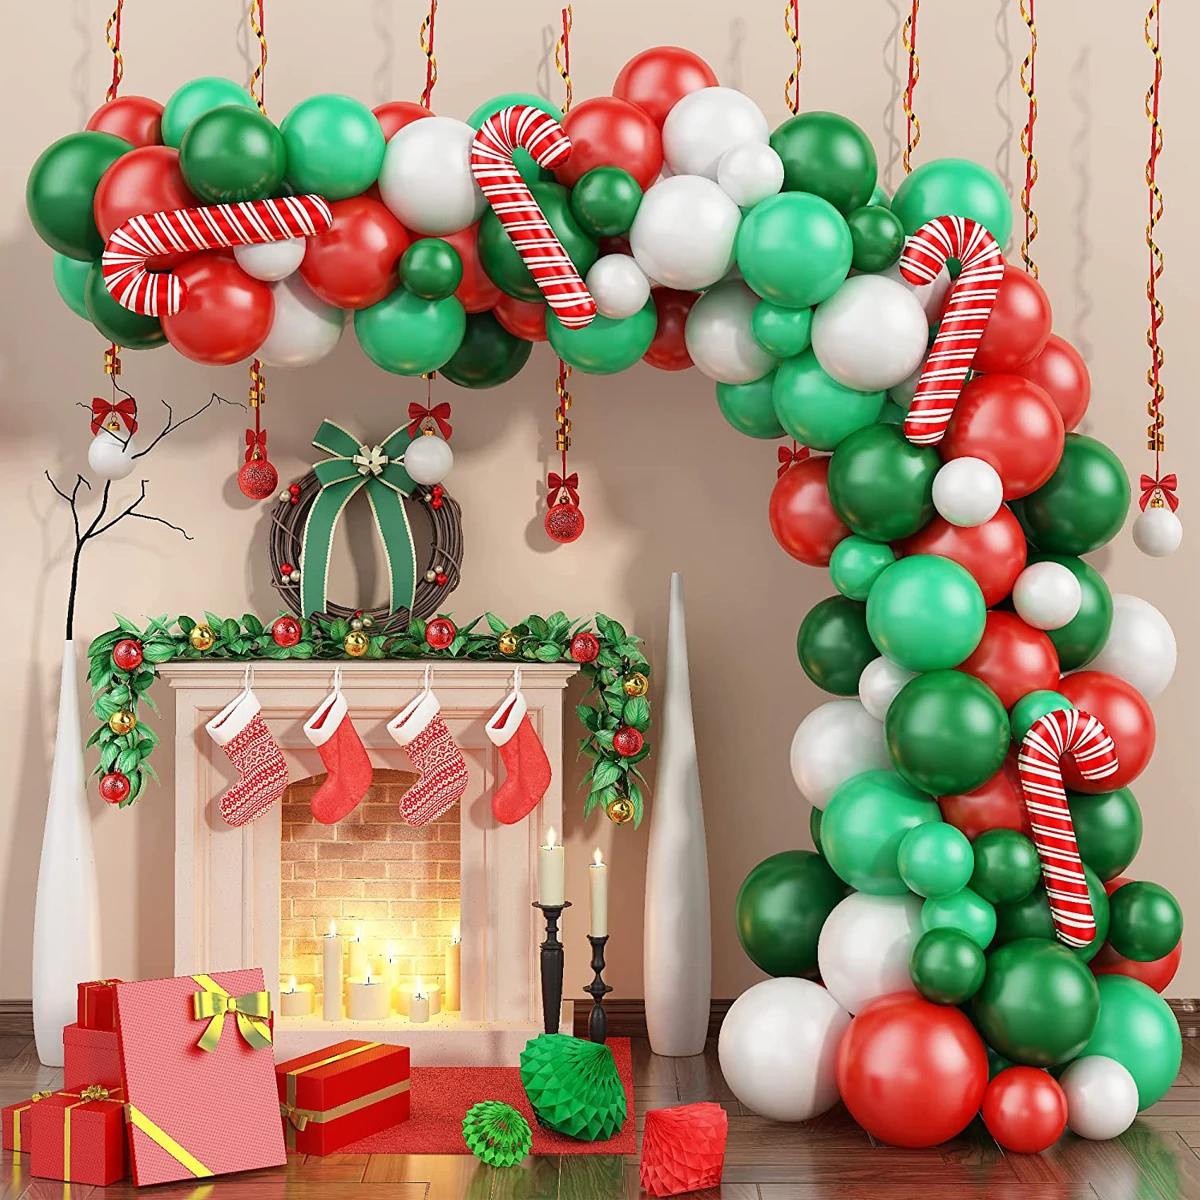 

Christmas Balloon Arch Green Gold Red Box Candy Balloons Garland Cone Explosion Star Foil Balloons New Year Christma Party Decor